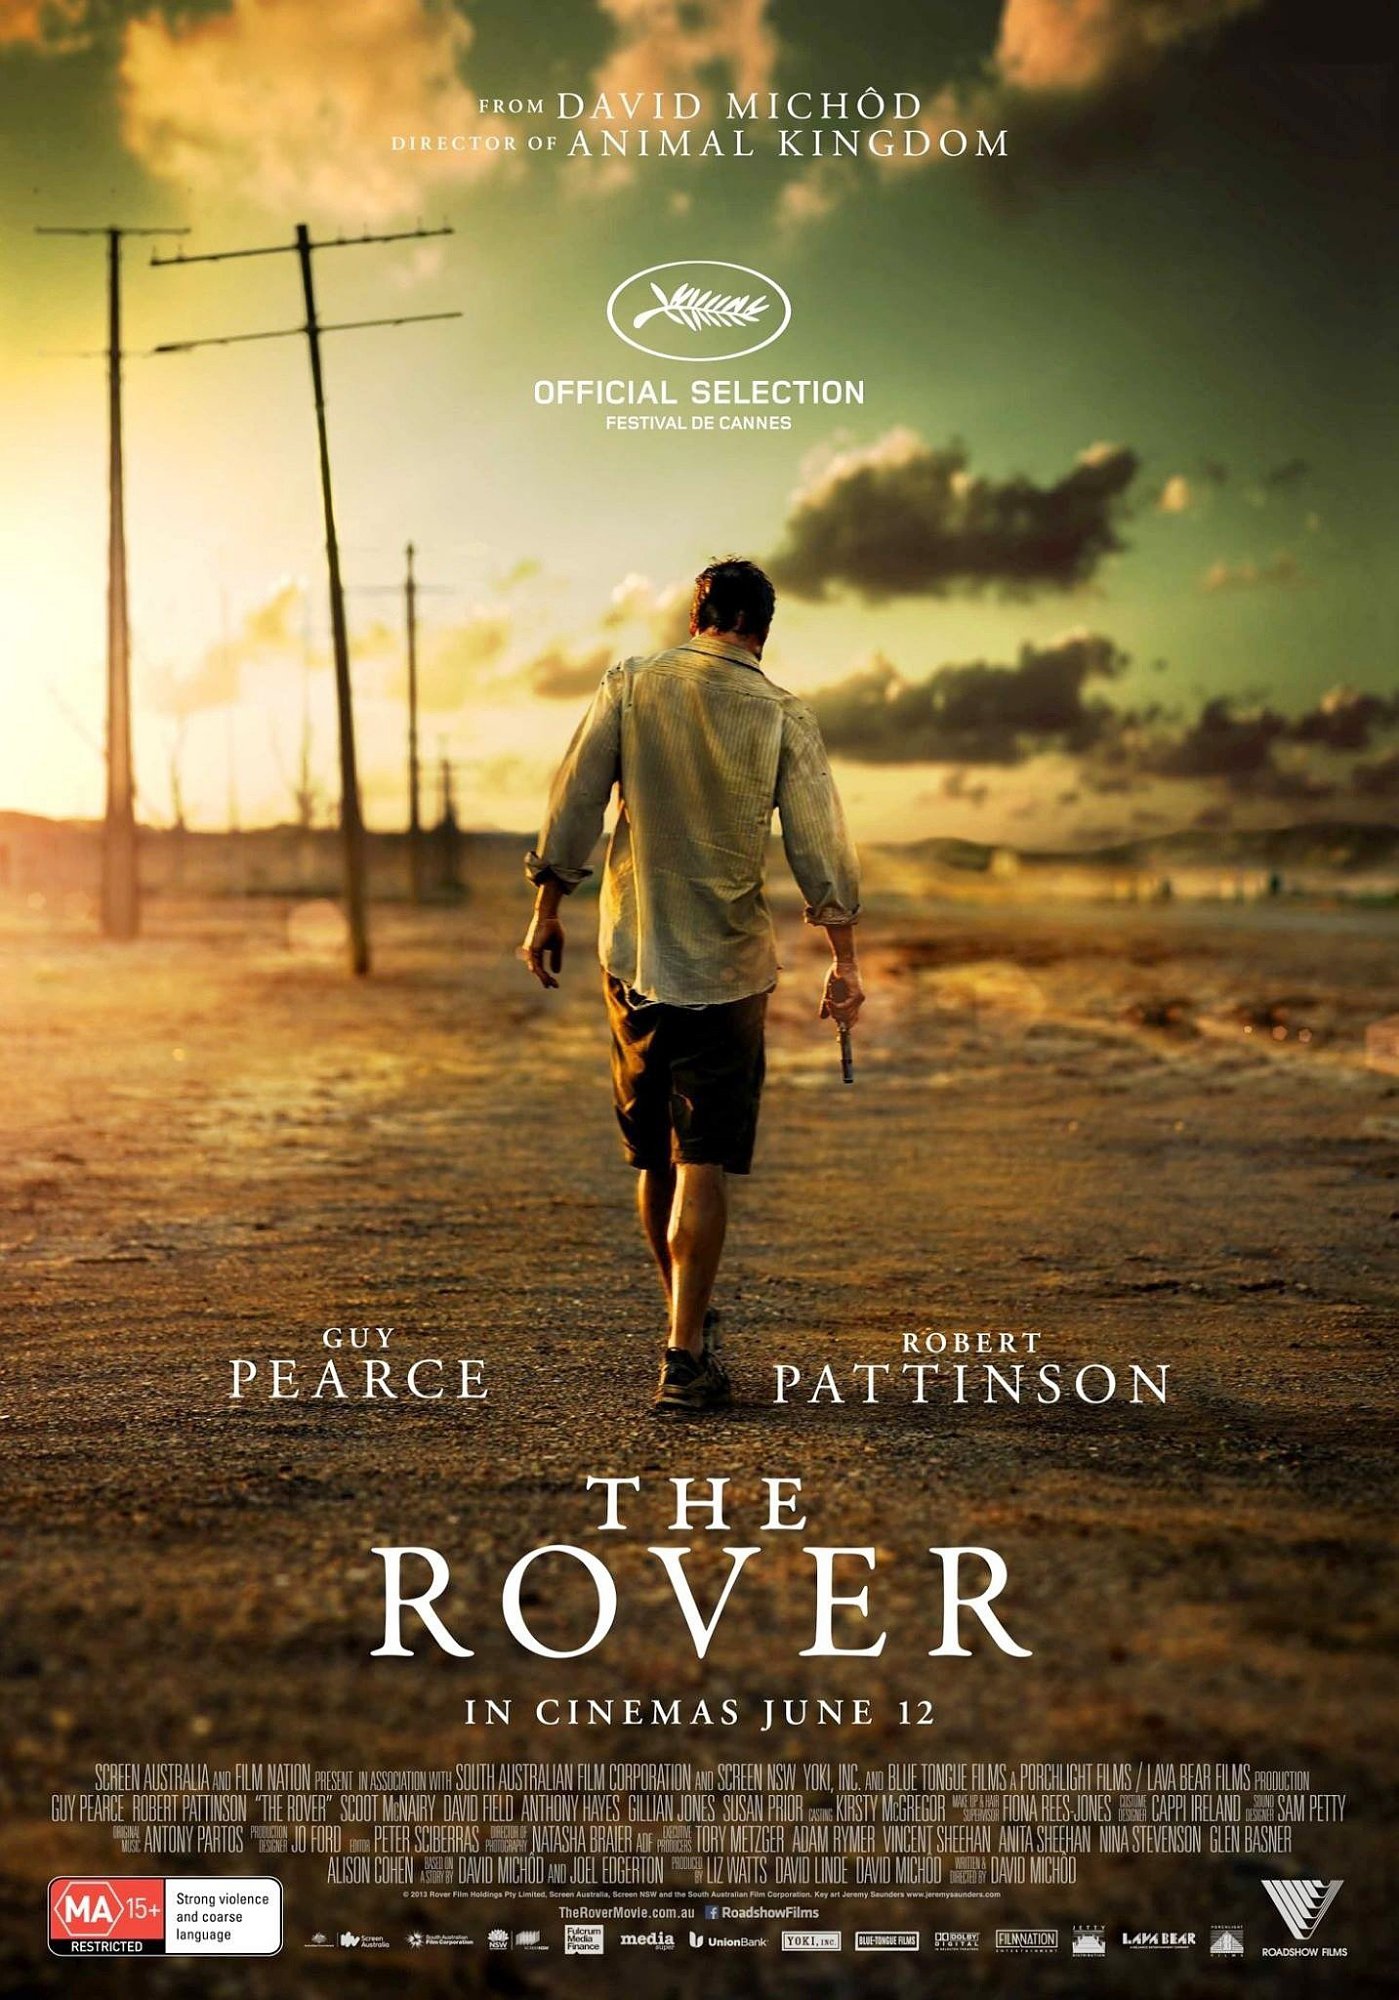 Poster of A24's The Rover (2014)